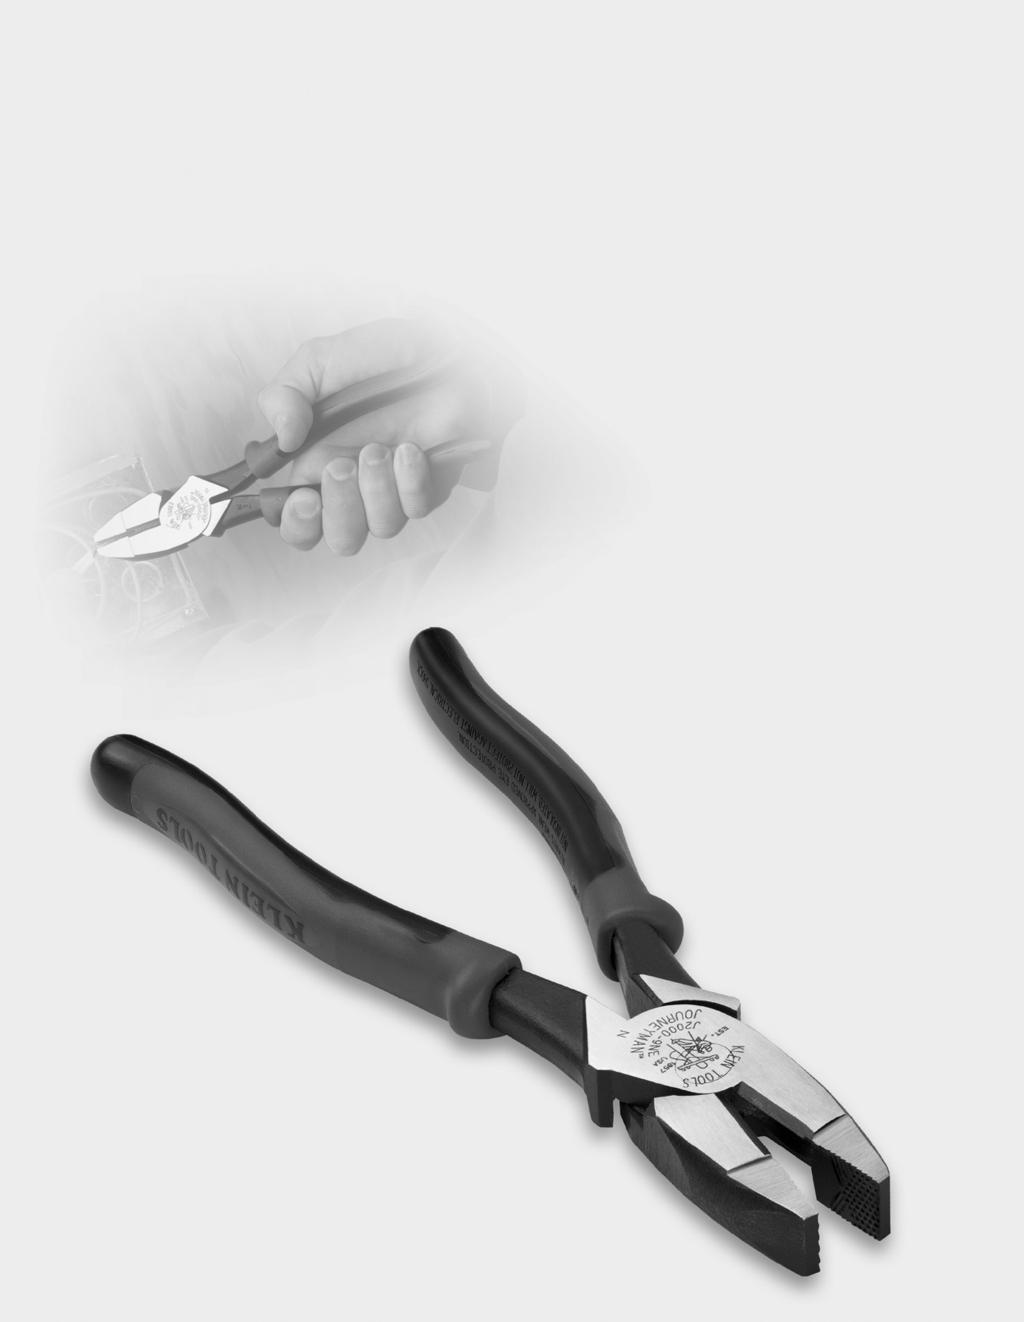 F o r P JourneymanTM Series r o f e The Journeyman line of hand tools represents the best of Klein quality